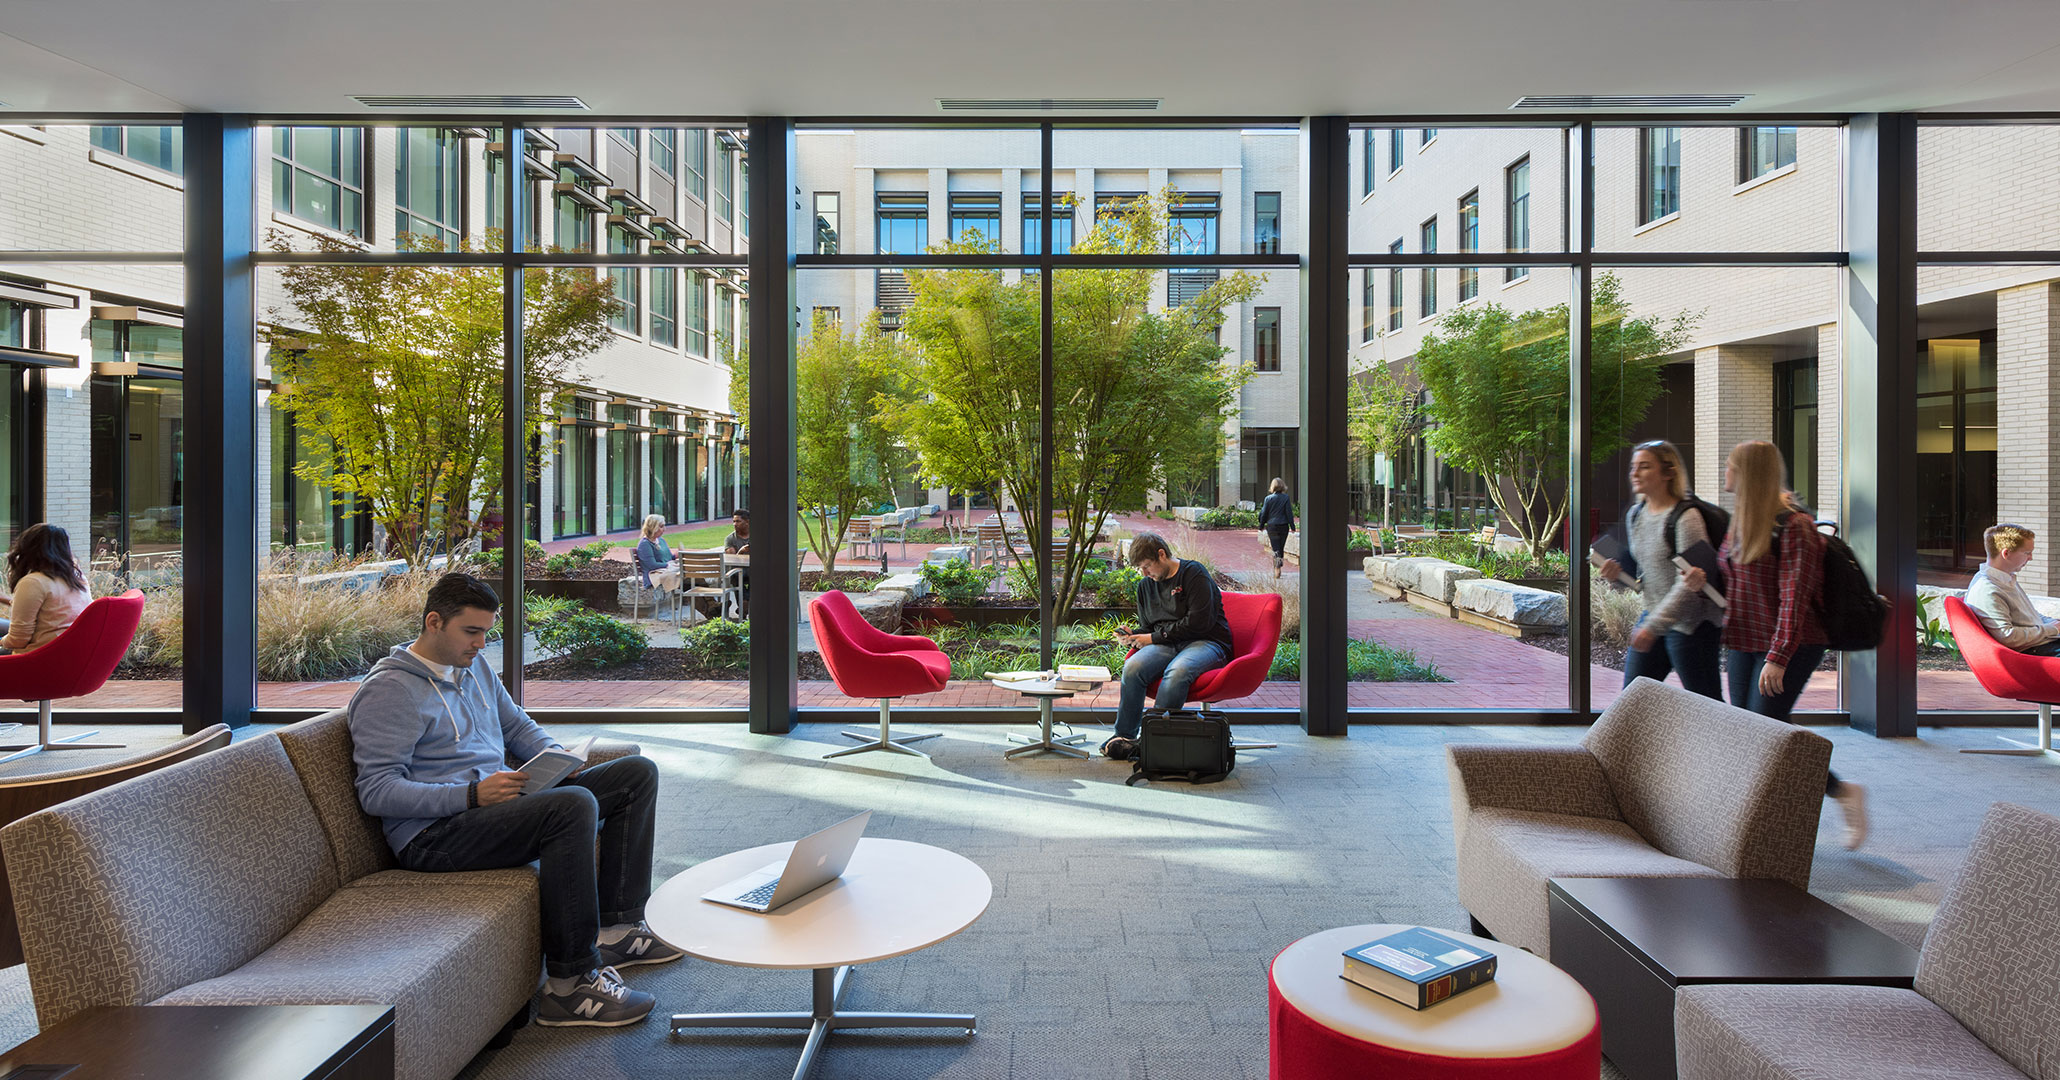 University of South Carolina worked with Boudreaux architects to design the café space at the new Law School.